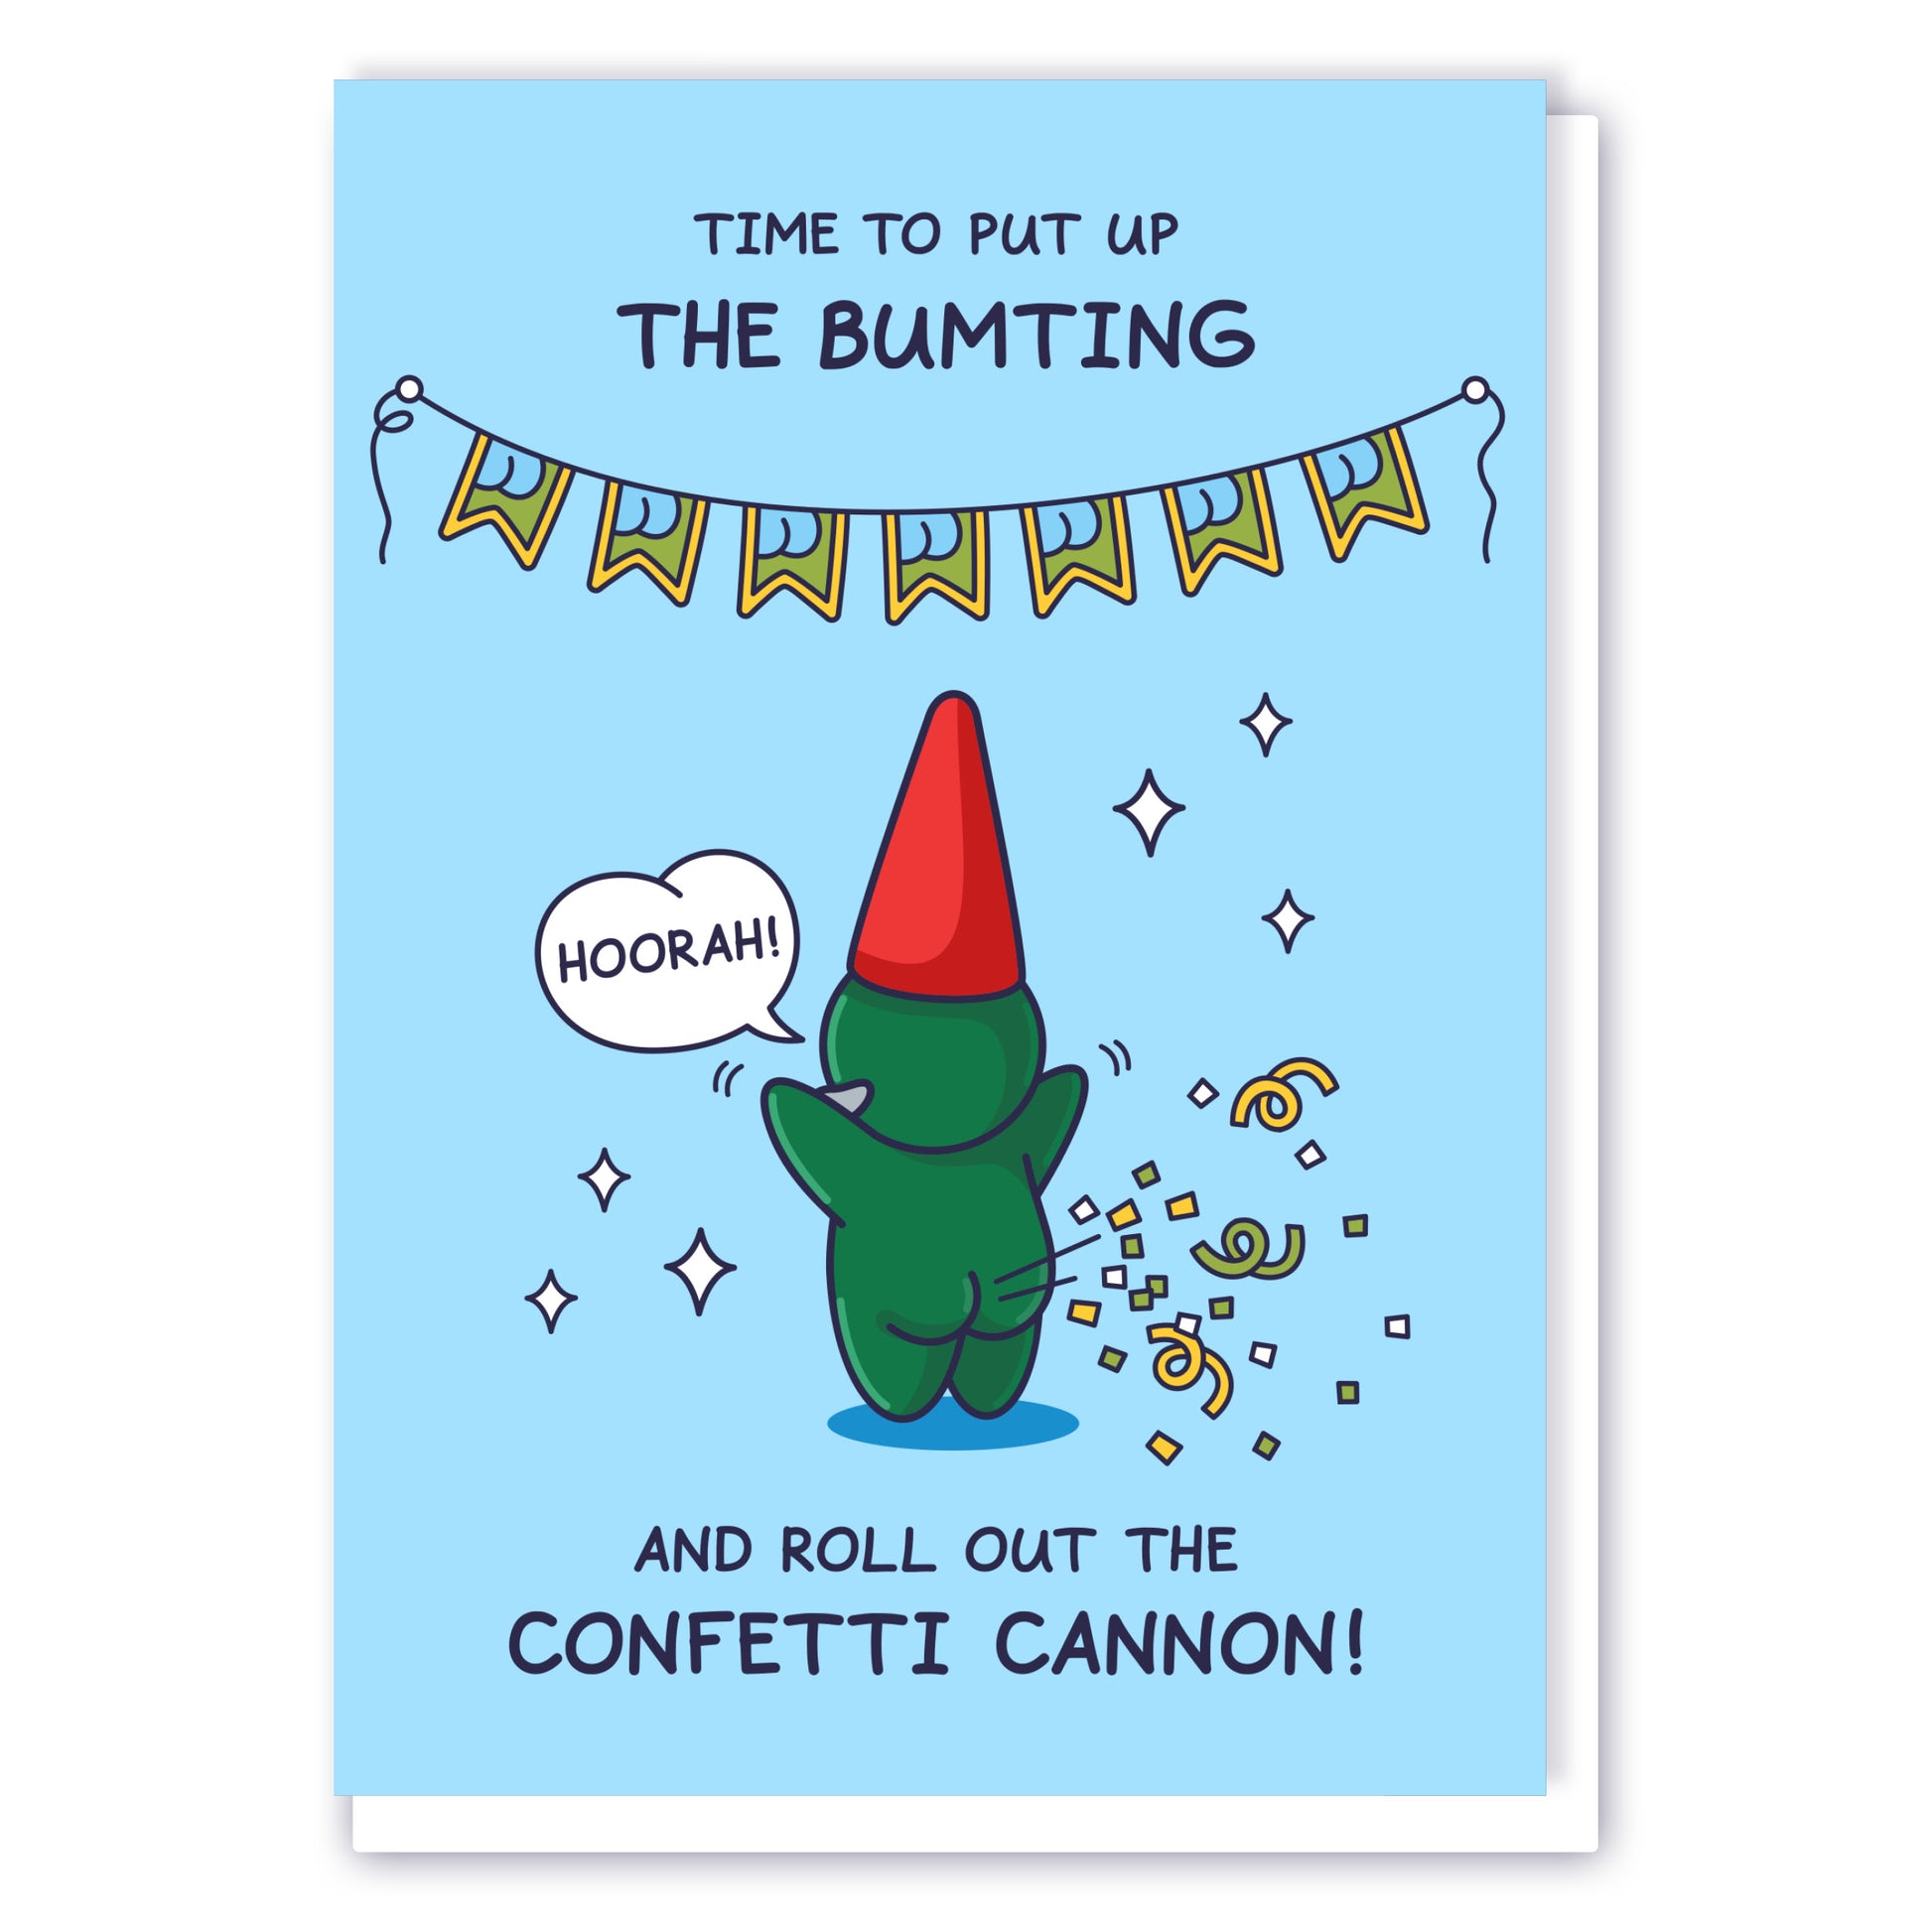 A birthday greeting card of a gnome cheering 'Hoorah!' as he shoots out a confetti cannon underneath a birthday bunting. The funny caption reads 'Time to put up the Bumting and roll out the Confetti Cannon!' 